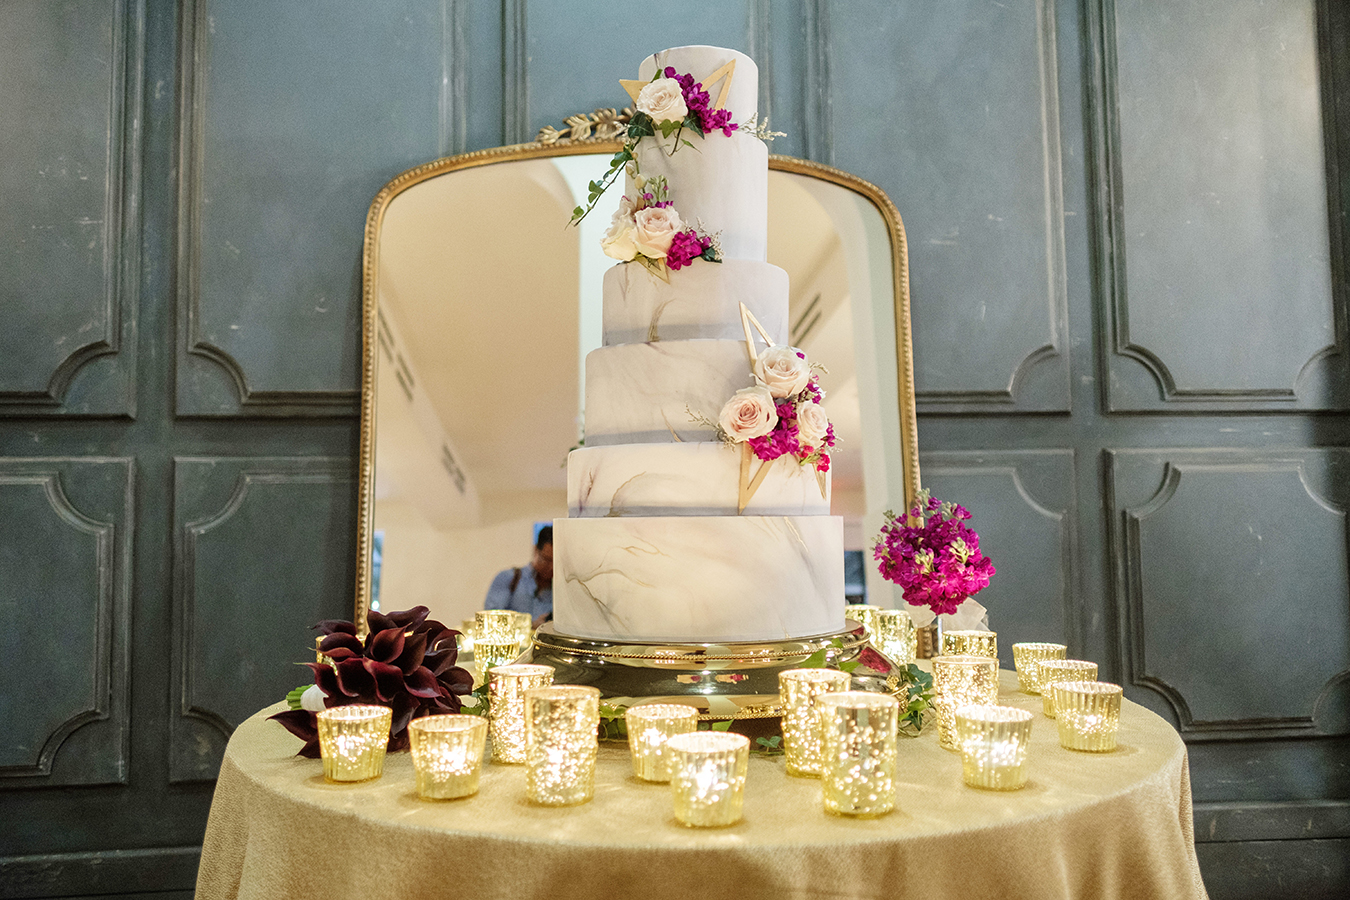 The wedding cake, designed by Chasing Wang, featured six tiers covered with marbled fondant and accented with fresh flowers and geometric decorations.